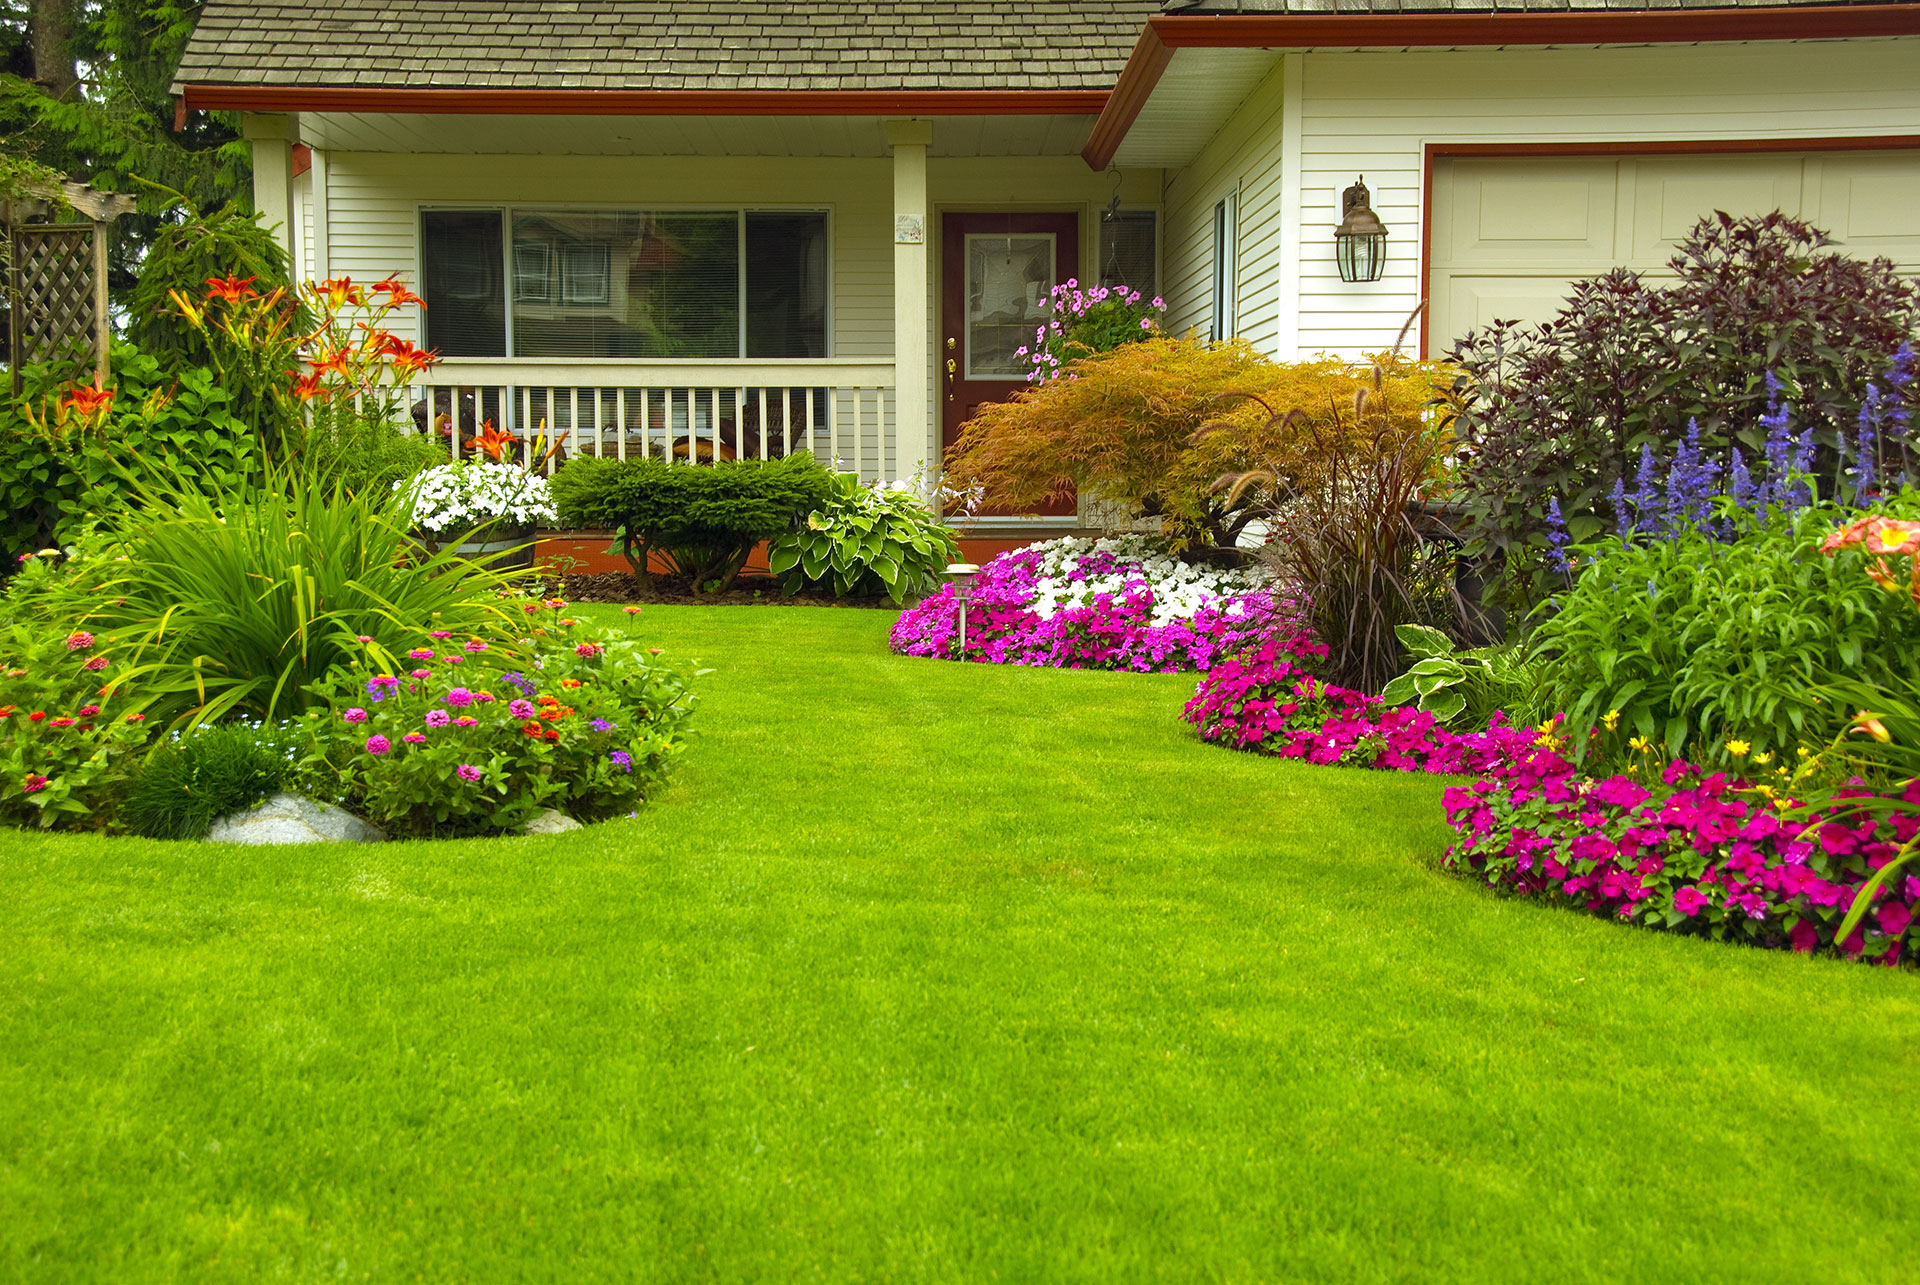 Factors to consider when choosing a landscaping contractor